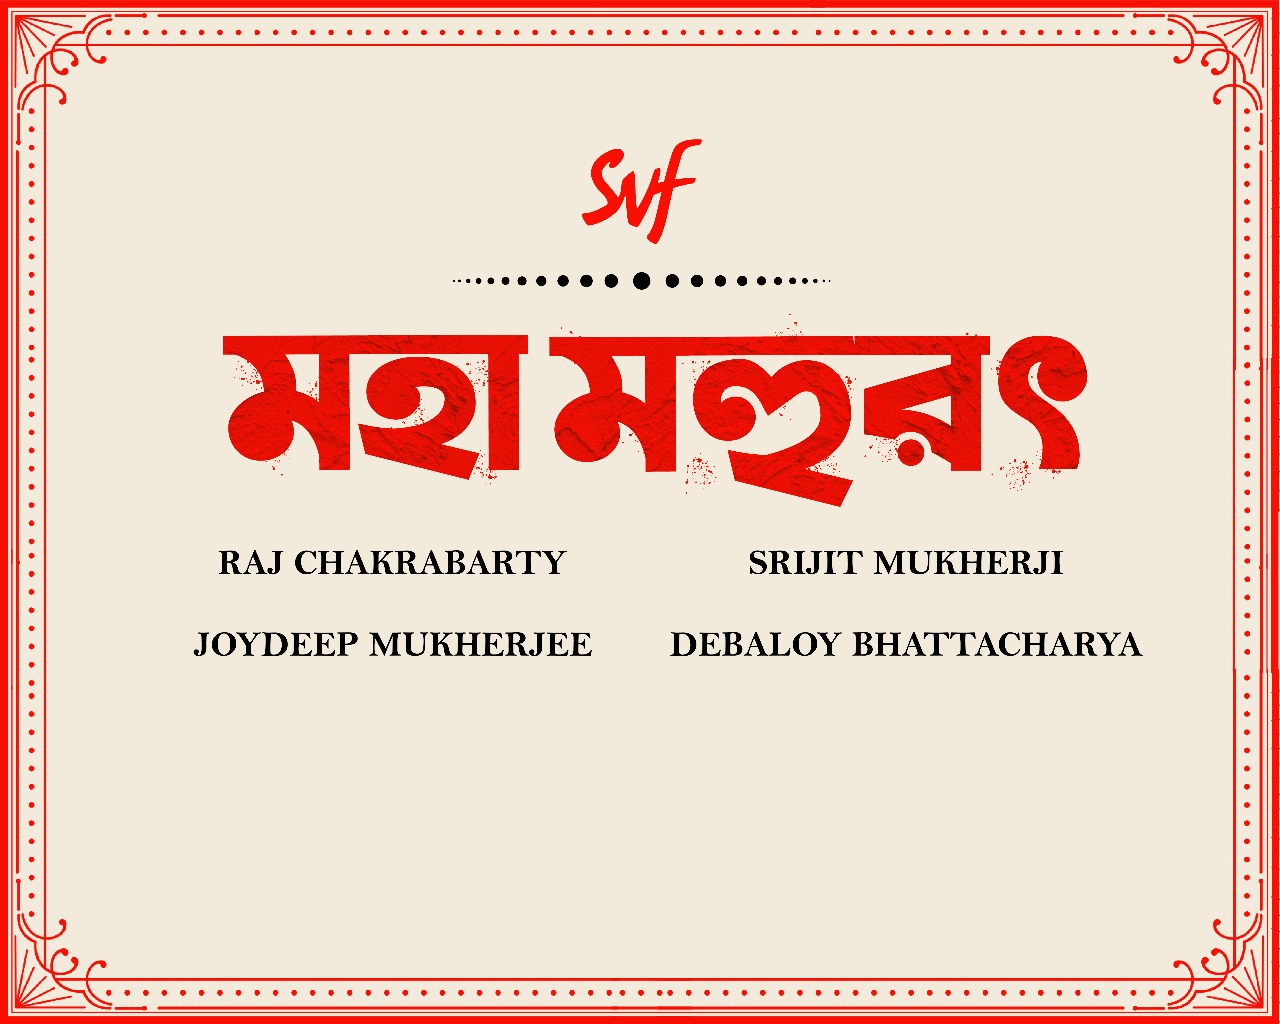 SVF unveiled four more remarkable titles during the "Maha-Mahurat" event.